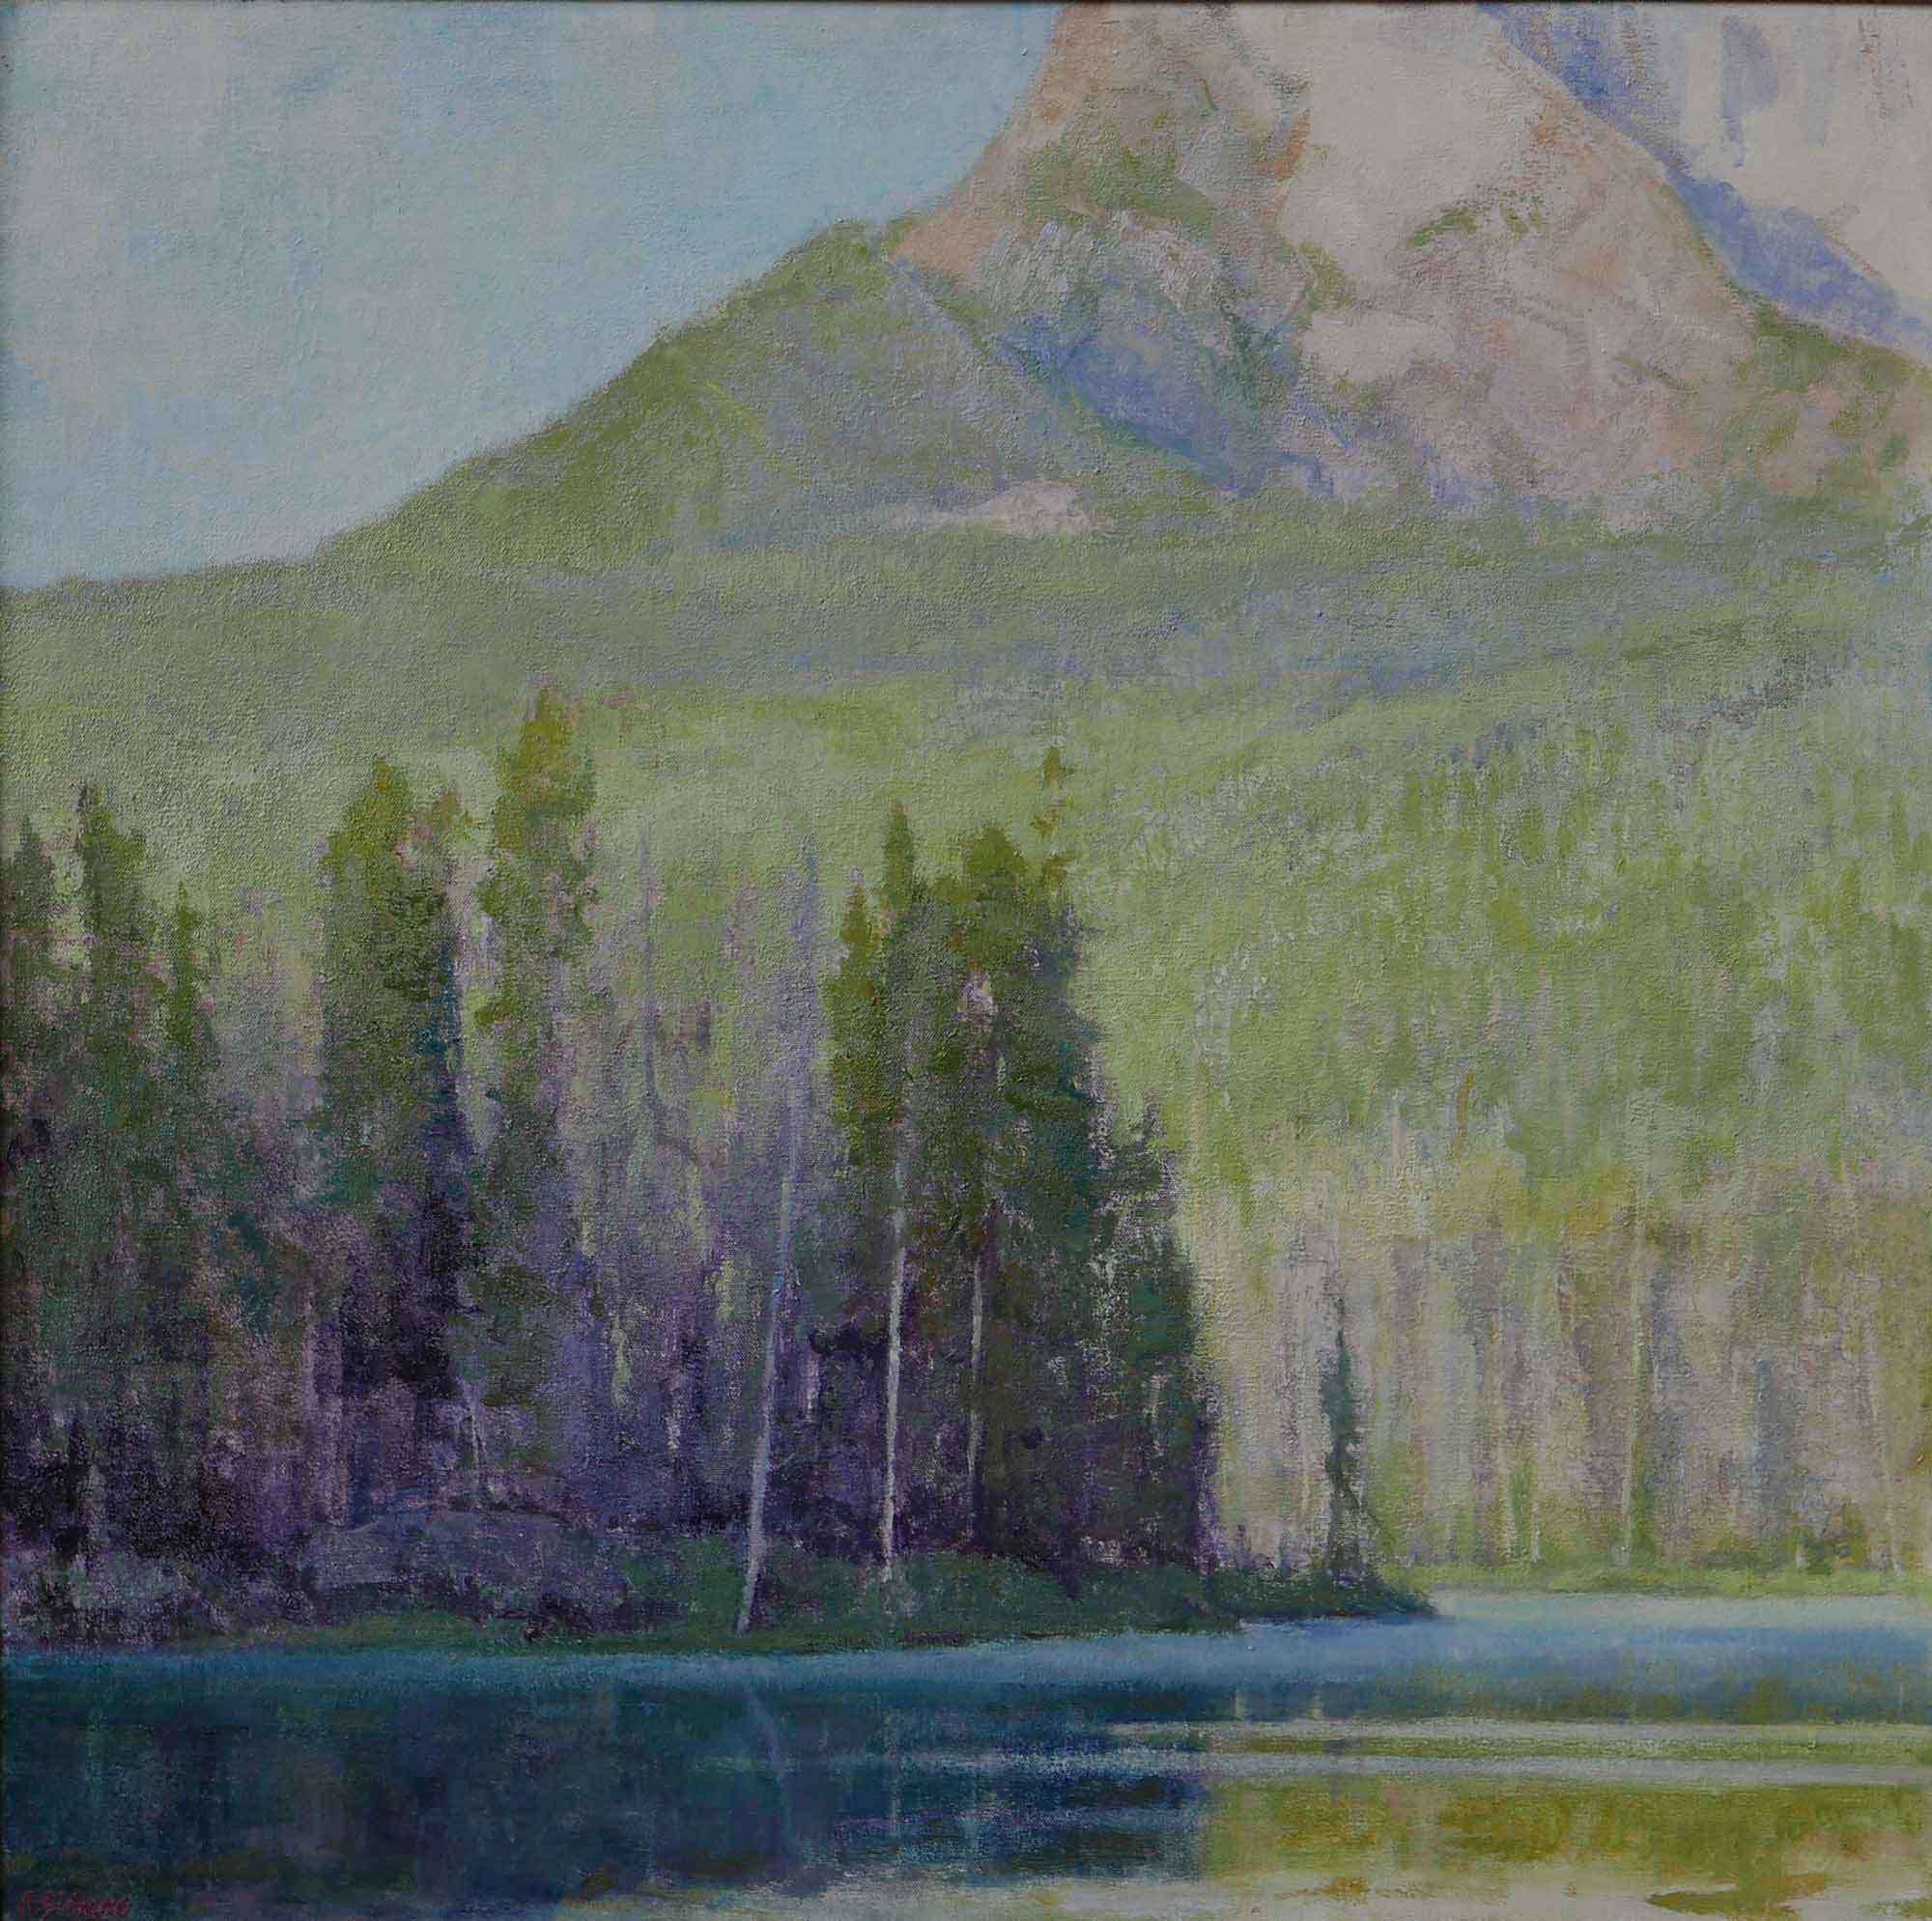 Shadows-of-Morning-Light,-Redffish-Lake-by-Amy-Sidrane-32′-high-X-32′-wide,-oil-on-linen-board,-Price-$11,500.00